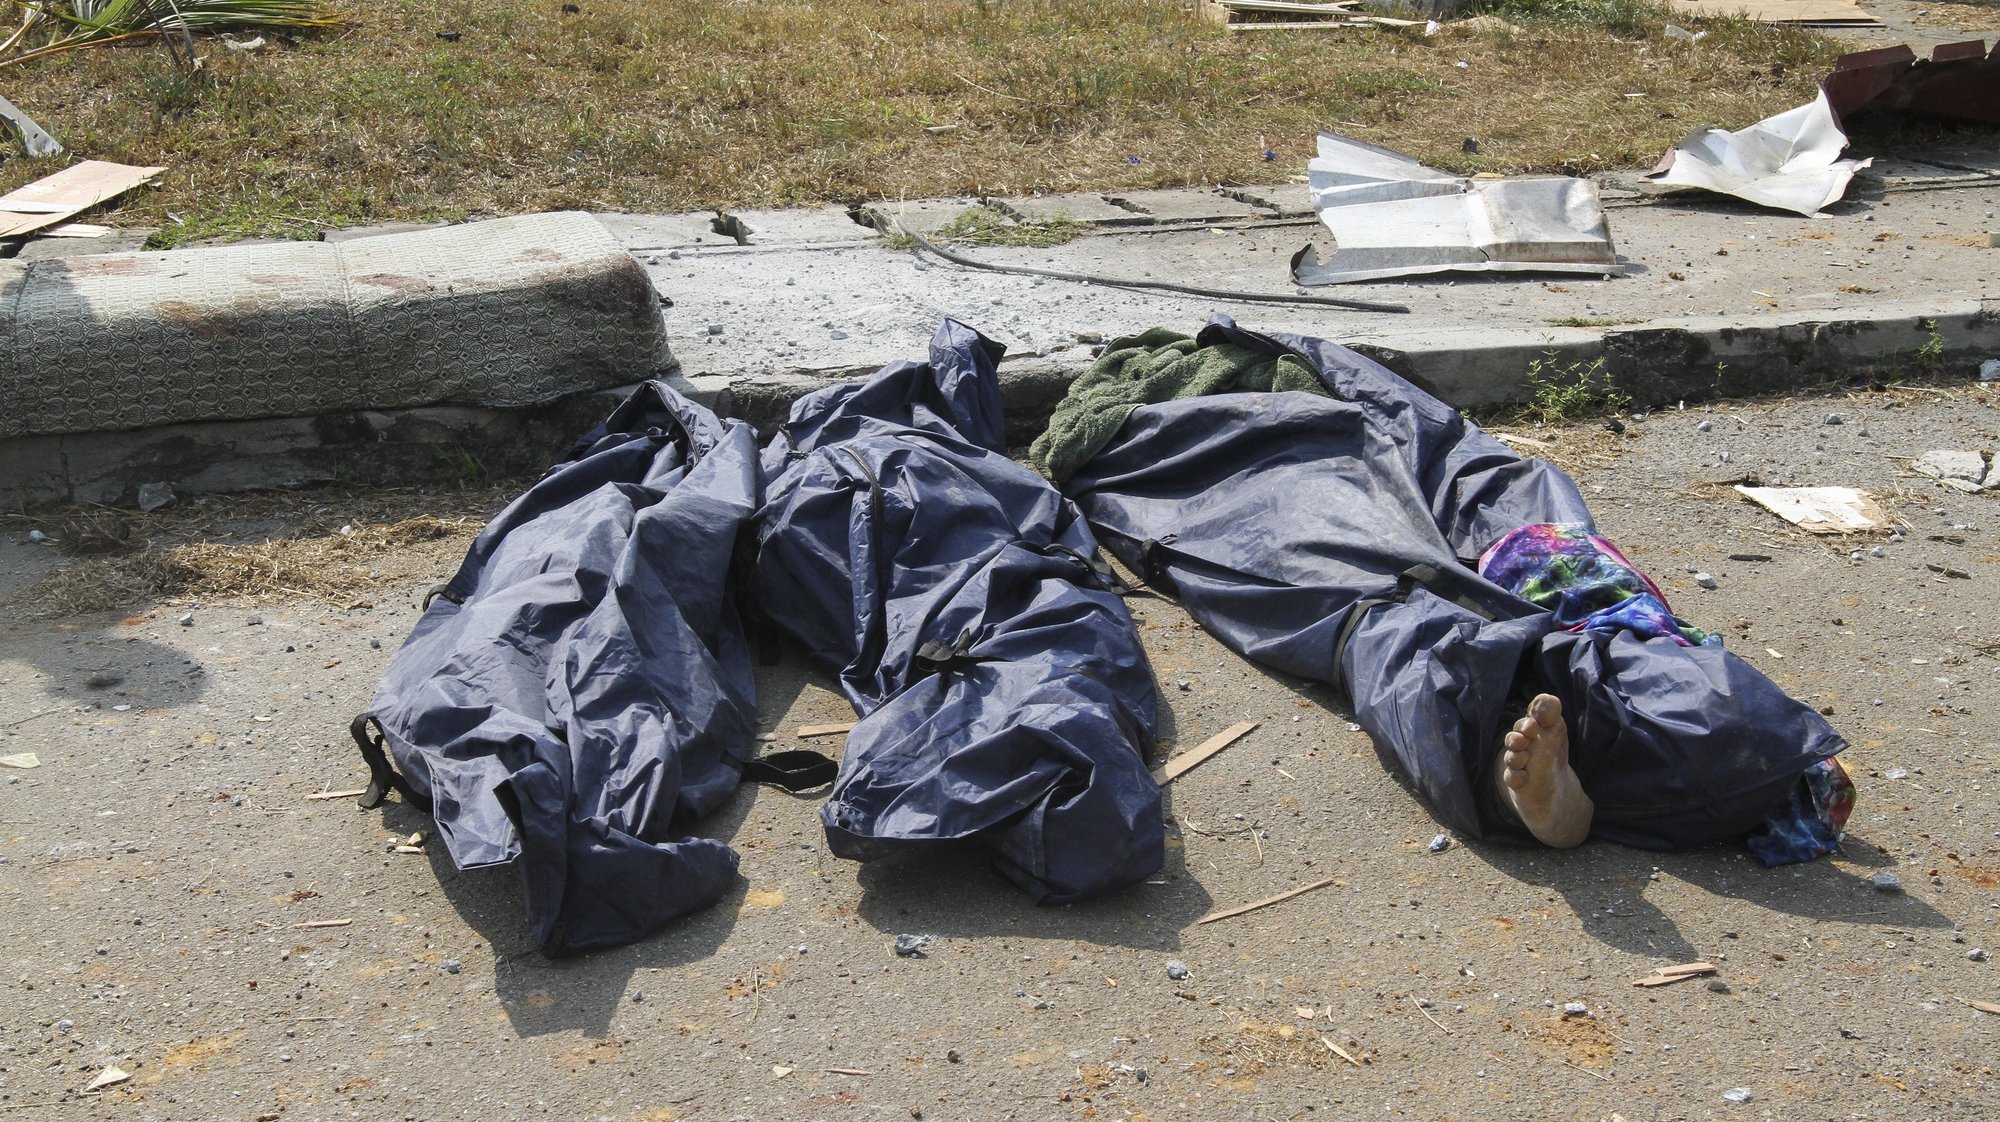 epa09062161 Bodies in body bags at the scene of the aftermath of an explosion in Bata, Equatorial Guinea, 08 March 2021. According to President Teodoro Obiang Nguema huge damage occured when a dynamite storage facility exploded in the port city of Bata on 07 March 2021. According to the Equatorial Guinea health ministry there is an initial count of 20 dead and 420 injured people are being treated in hospitals.  EPA/JOSE LUIS ABECARA AGUESOMO ATTENTION EDITORS: GRAPHIC CONTENT